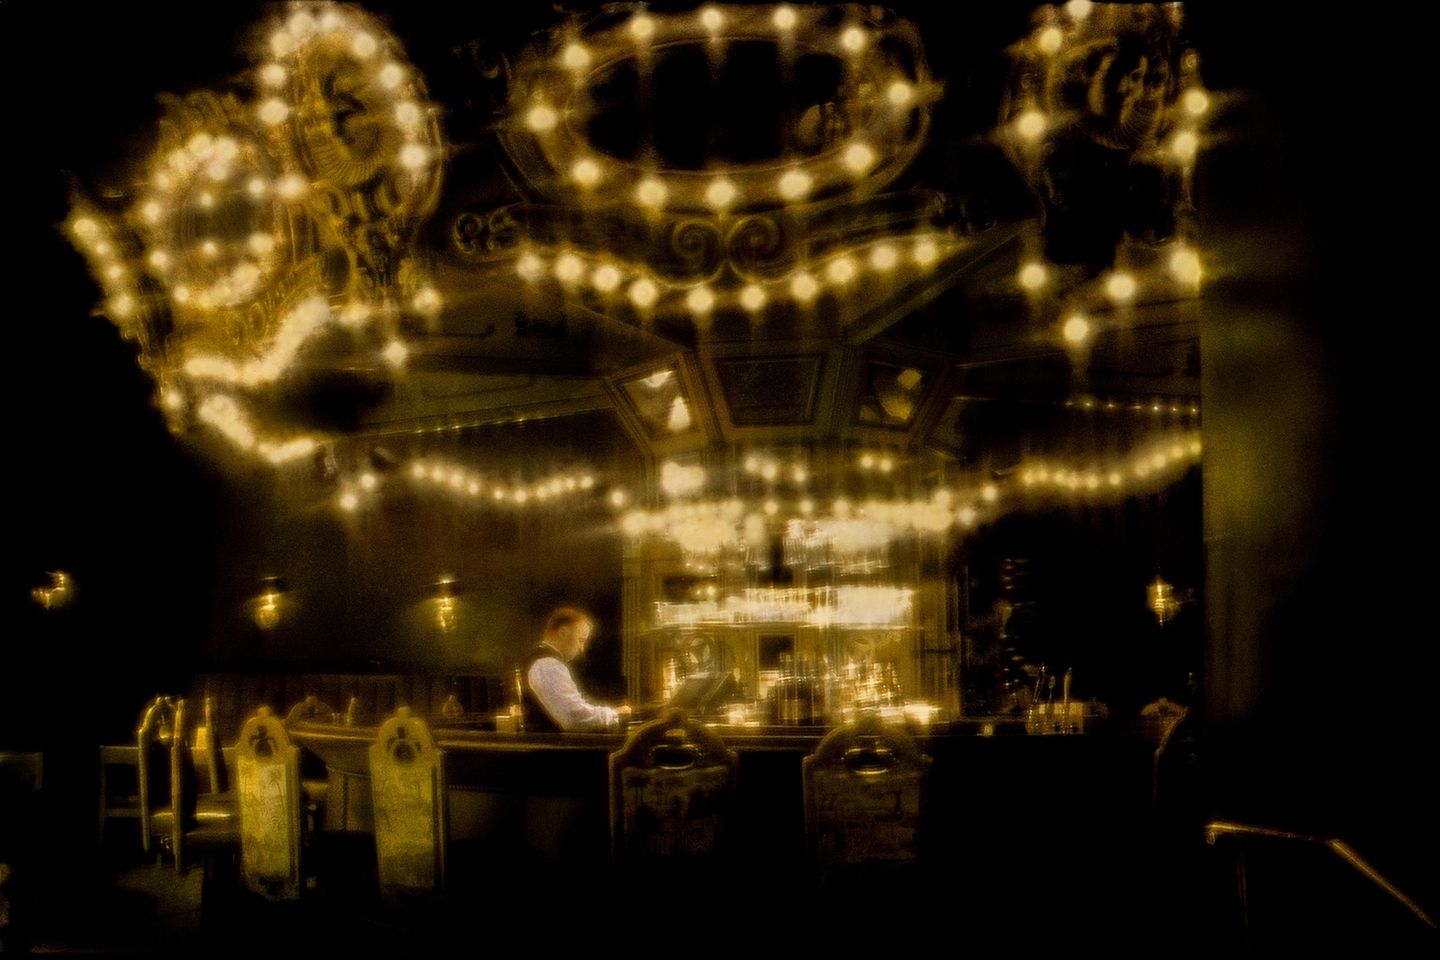 A man sitting at the bar in front of lights.